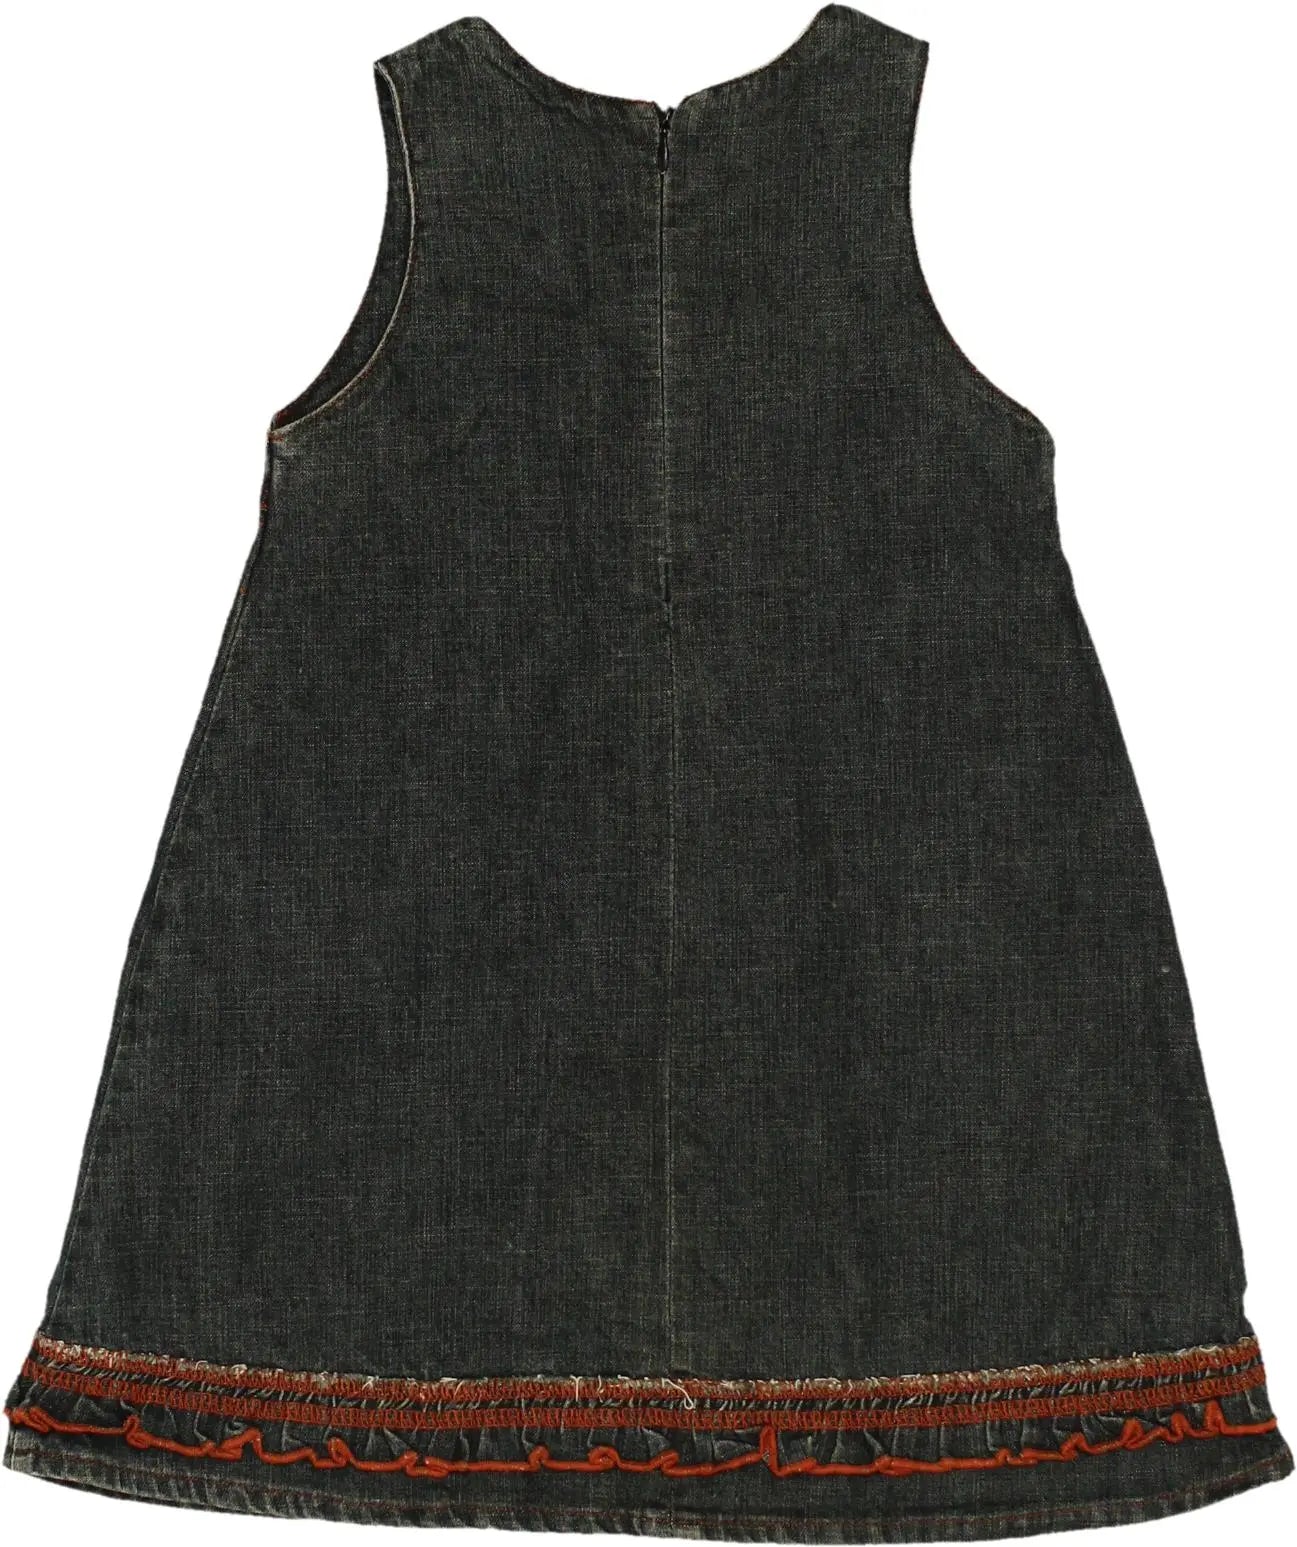 Unknown - Denim Sleeveless Dress- ThriftTale.com - Vintage and second handclothing